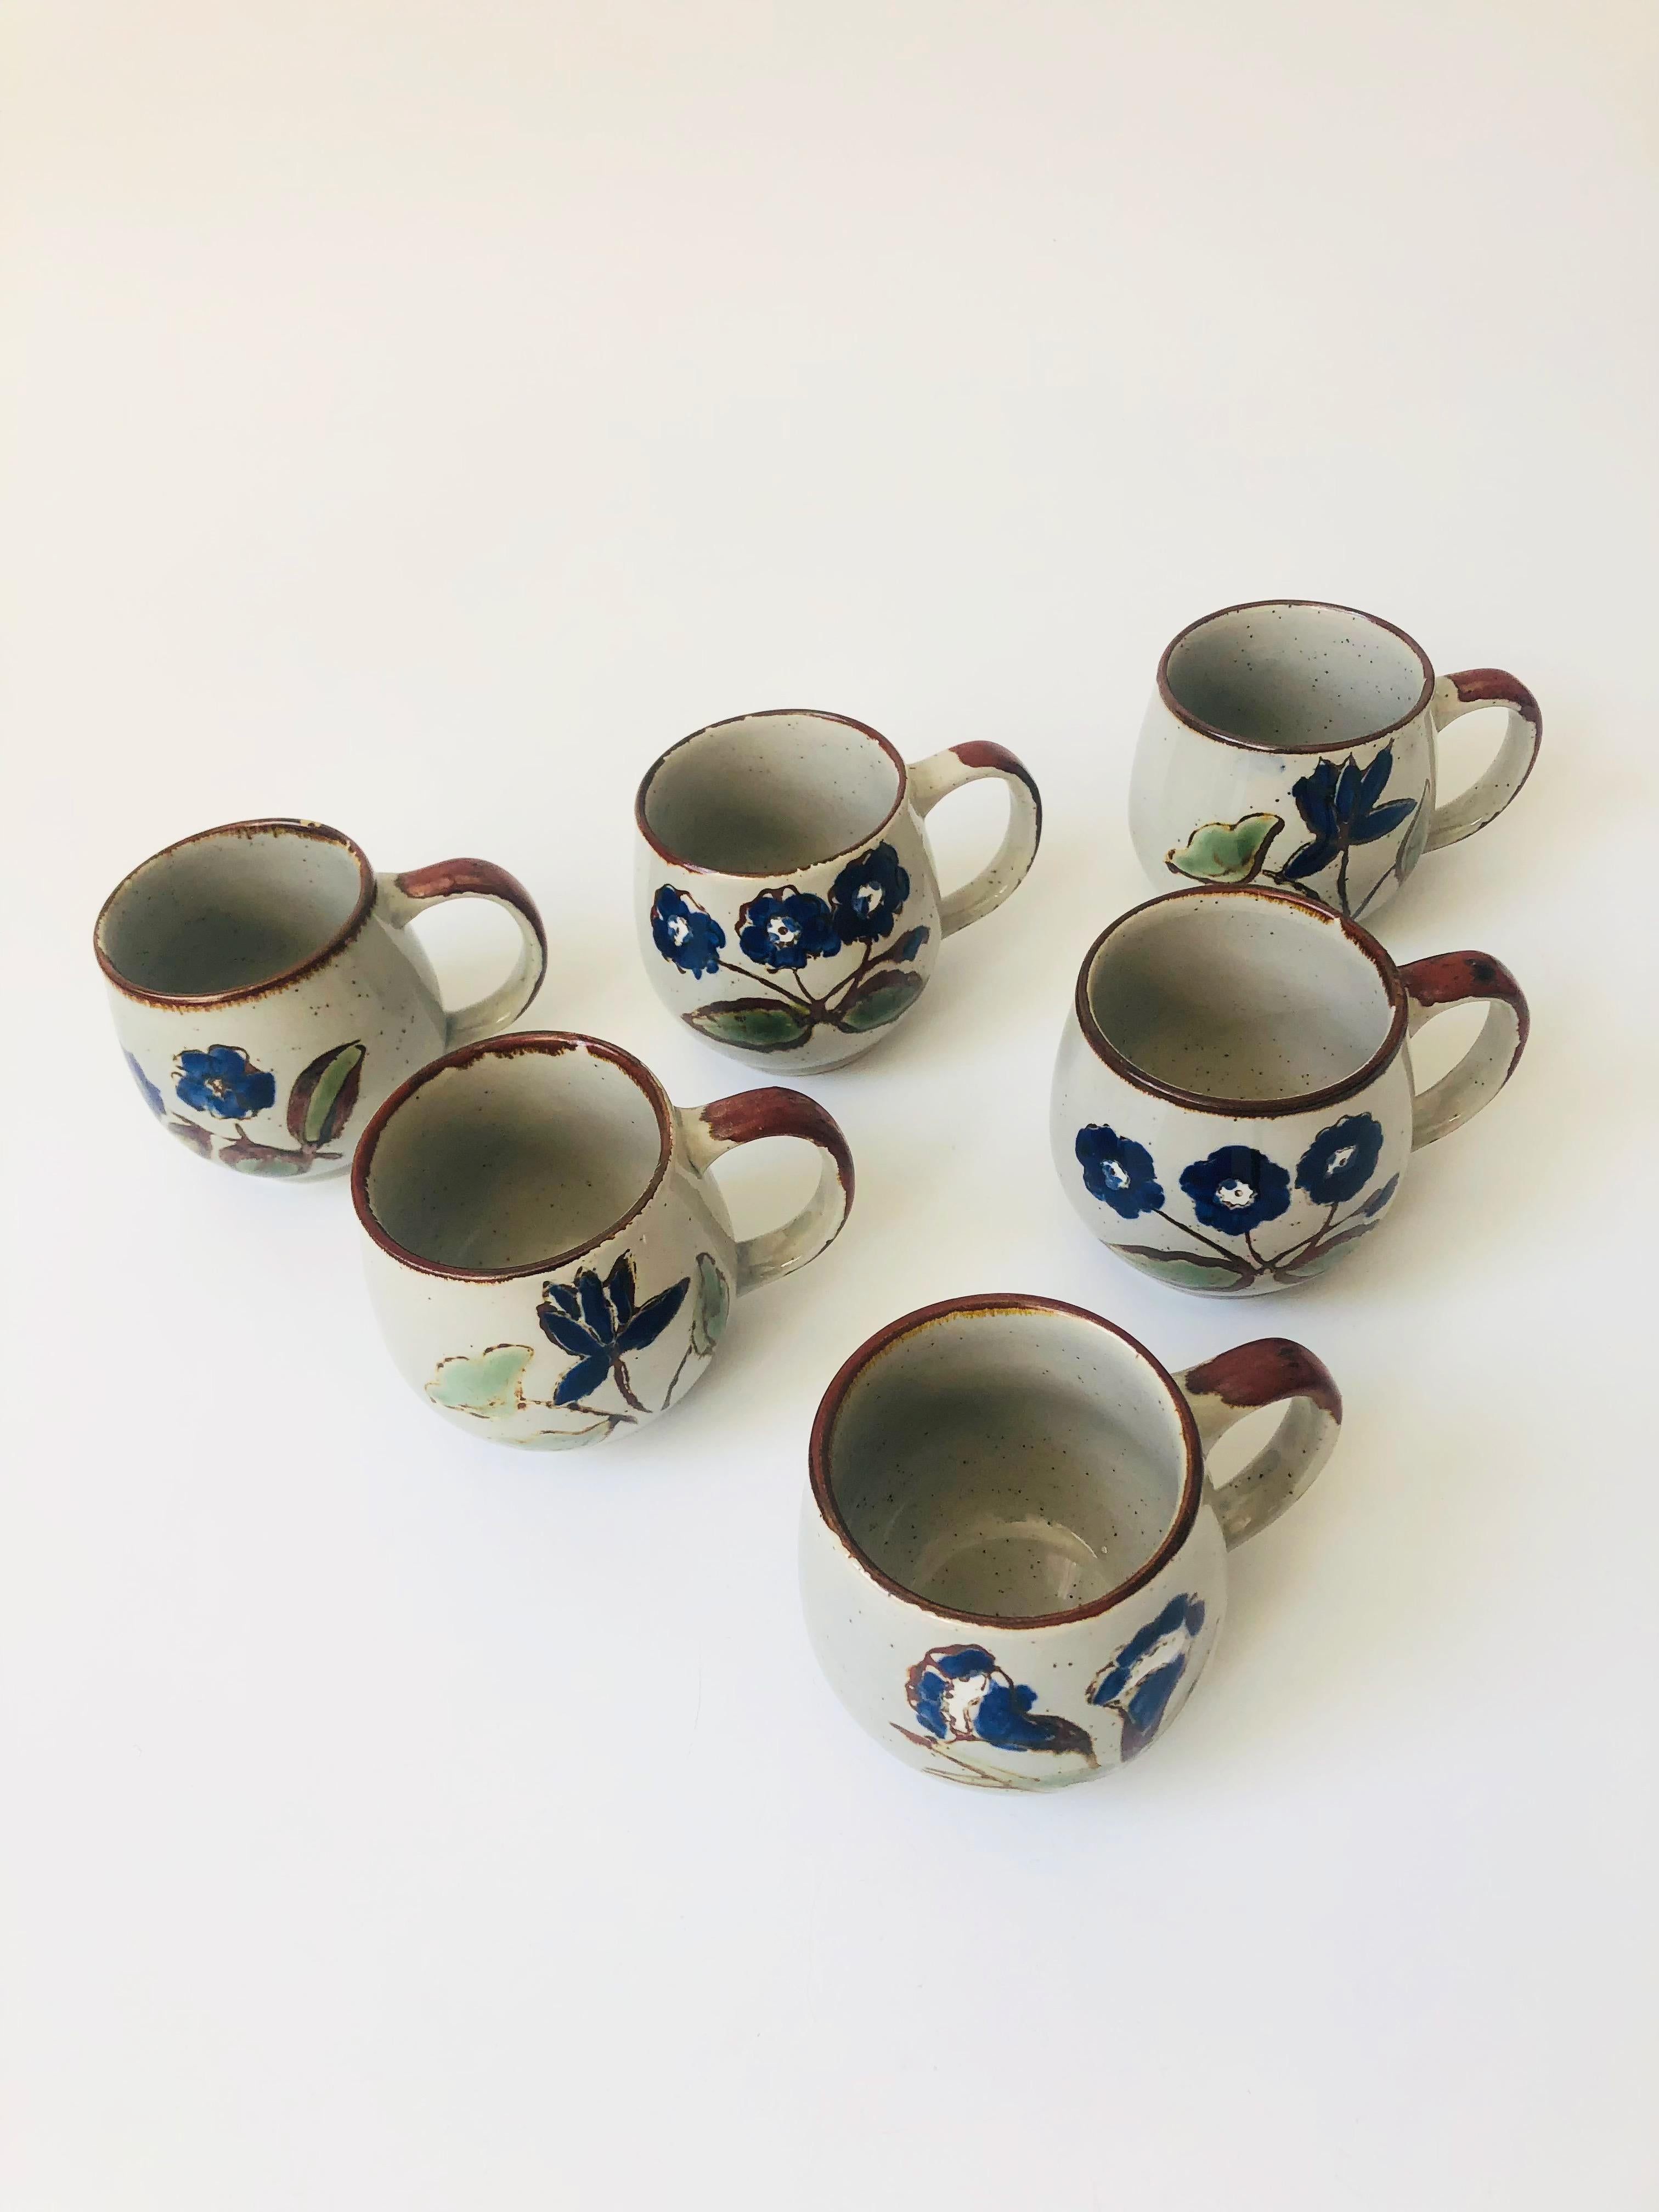 A set of 6 vintage pottery mugs. Each features a sweet handpainted blue floral design over a speckled gray base color.
 